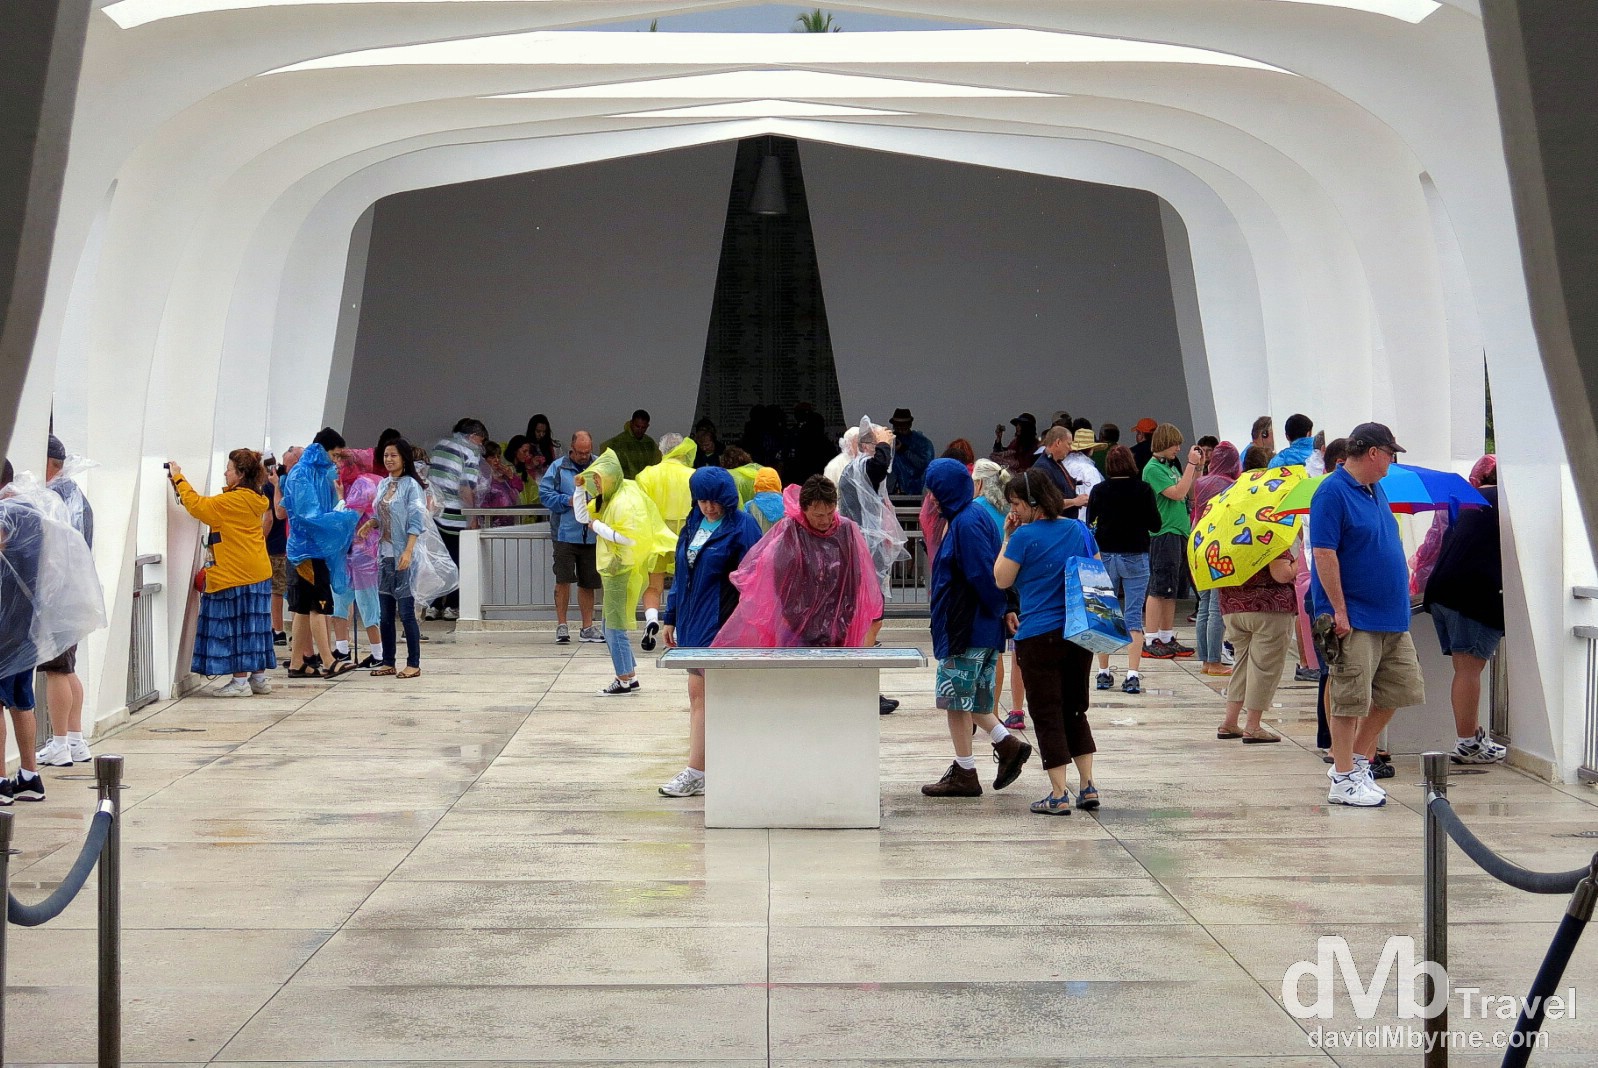 Windswept & wet inside the USS Arizona Memorial in Pearl Harbour, Oahu, Hawaii, USA. March 10th 2013.